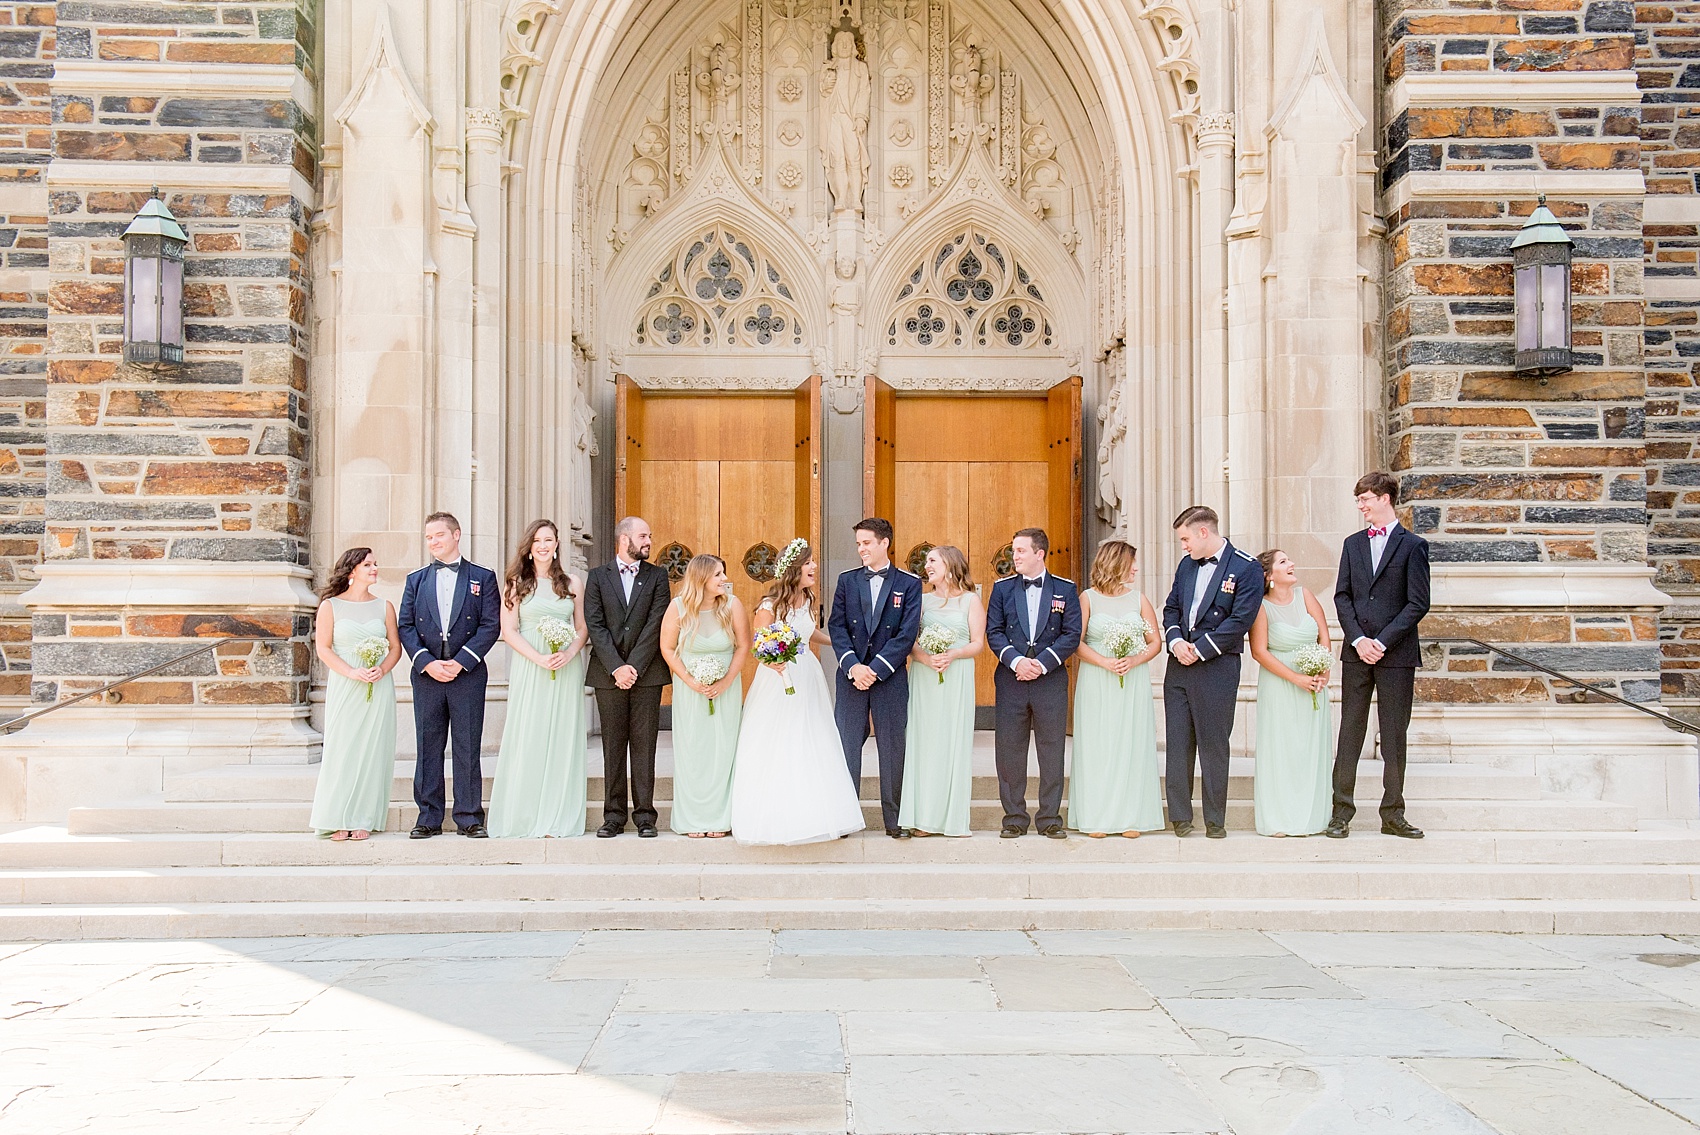 Mikkel Paige Photography photo of a Duke Chapel wedding in Durham, North Carolina. The bride, groom and bridal party in navy and mint green on the steps of the iconic gothic church.